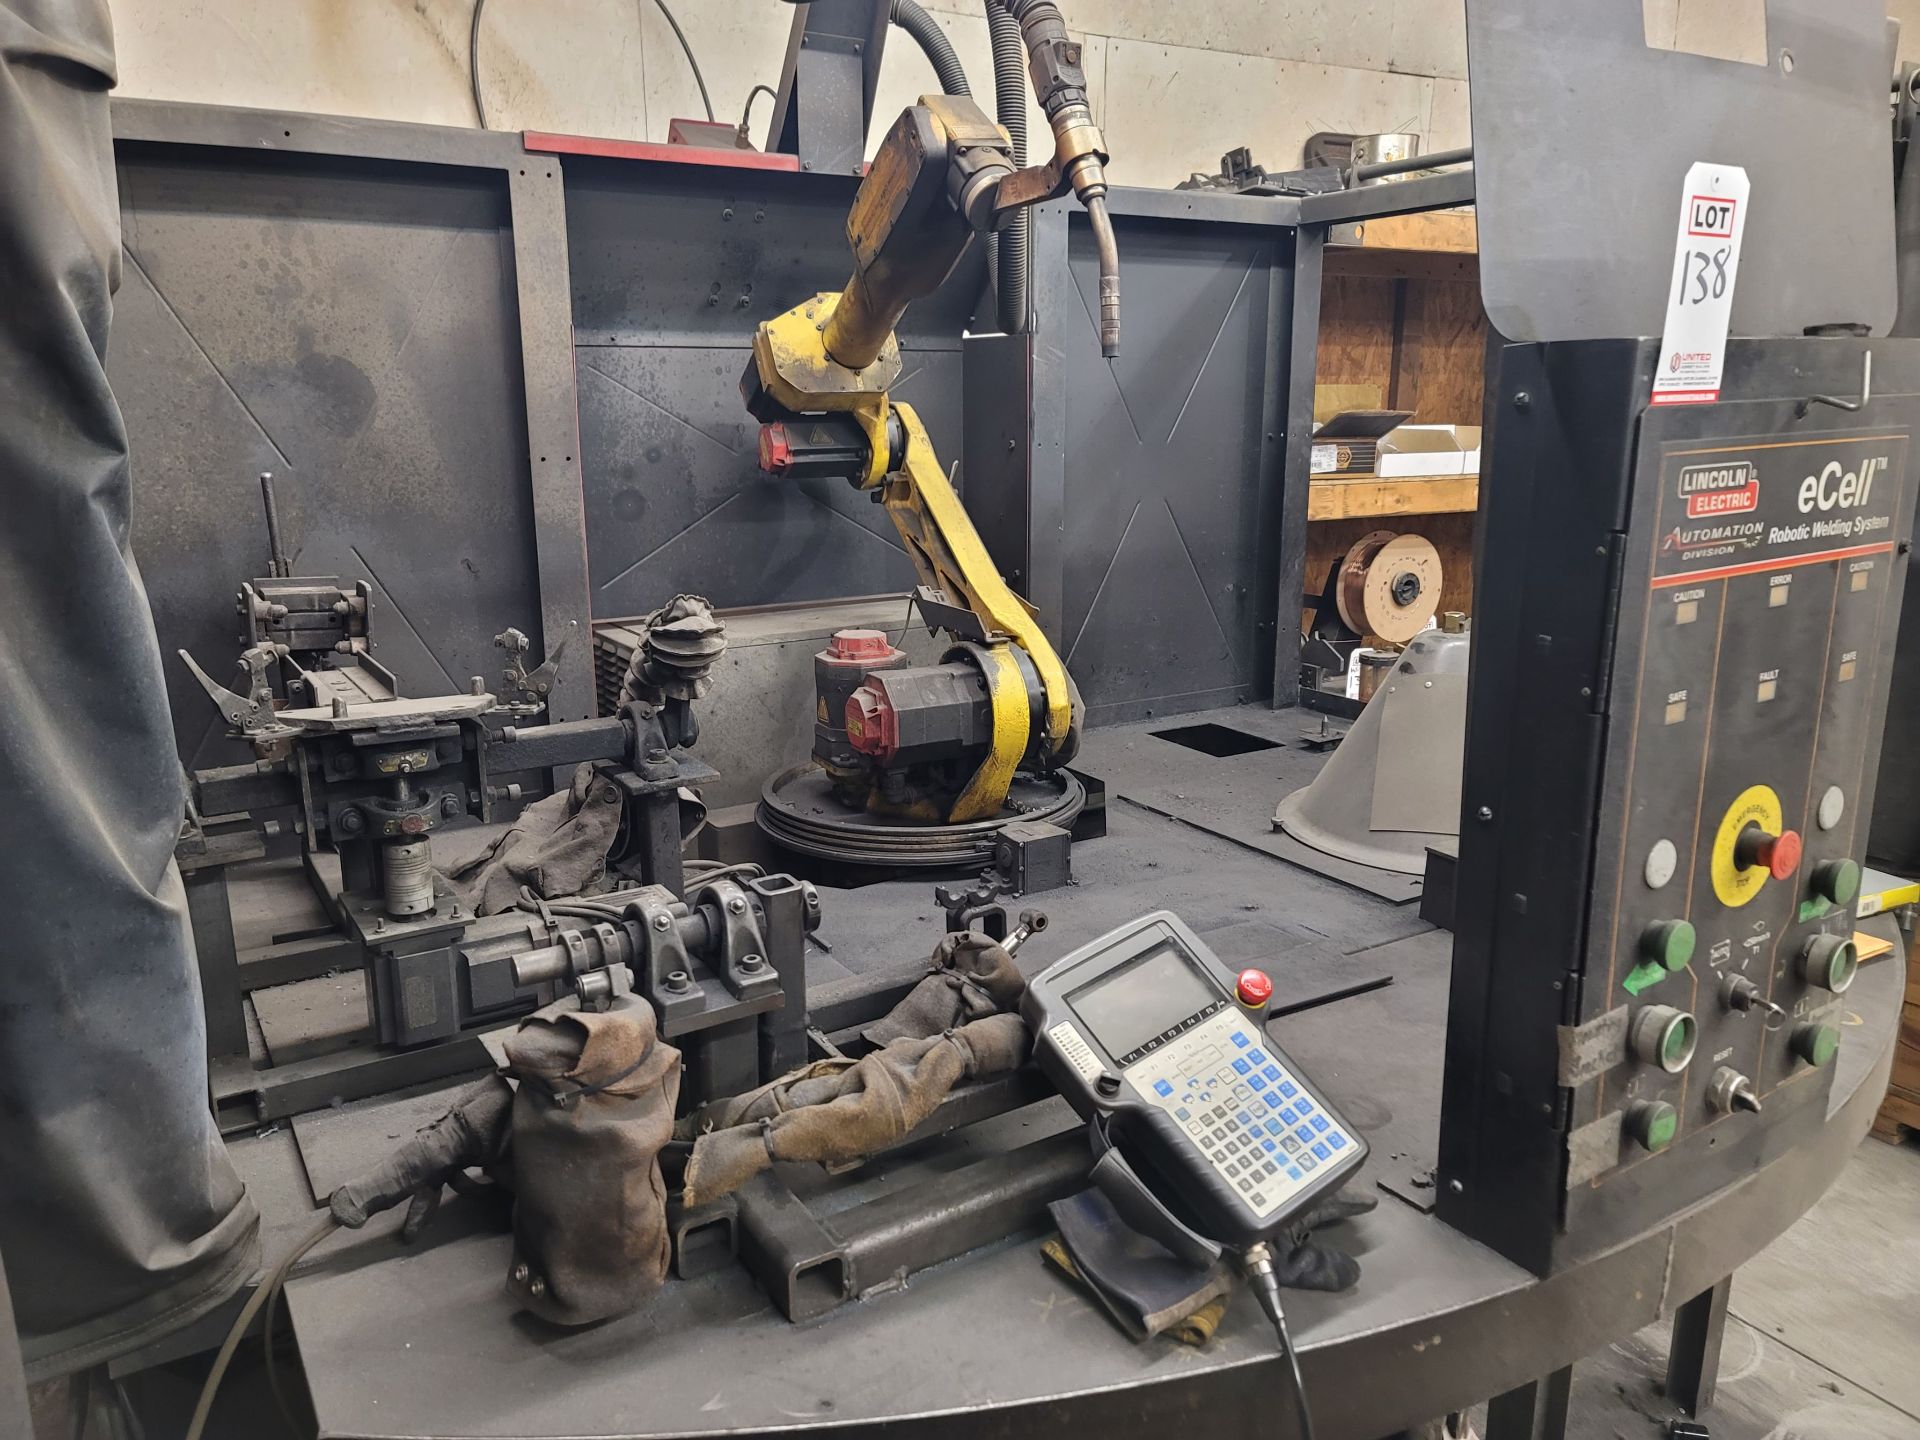 2004 LINCOLN ELECTRIC E-CELL ROBOTIC WELDING SYSTEM, FANUC 6-AXIS ROBOT 100IBE W/ RJ3IB - Image 5 of 13